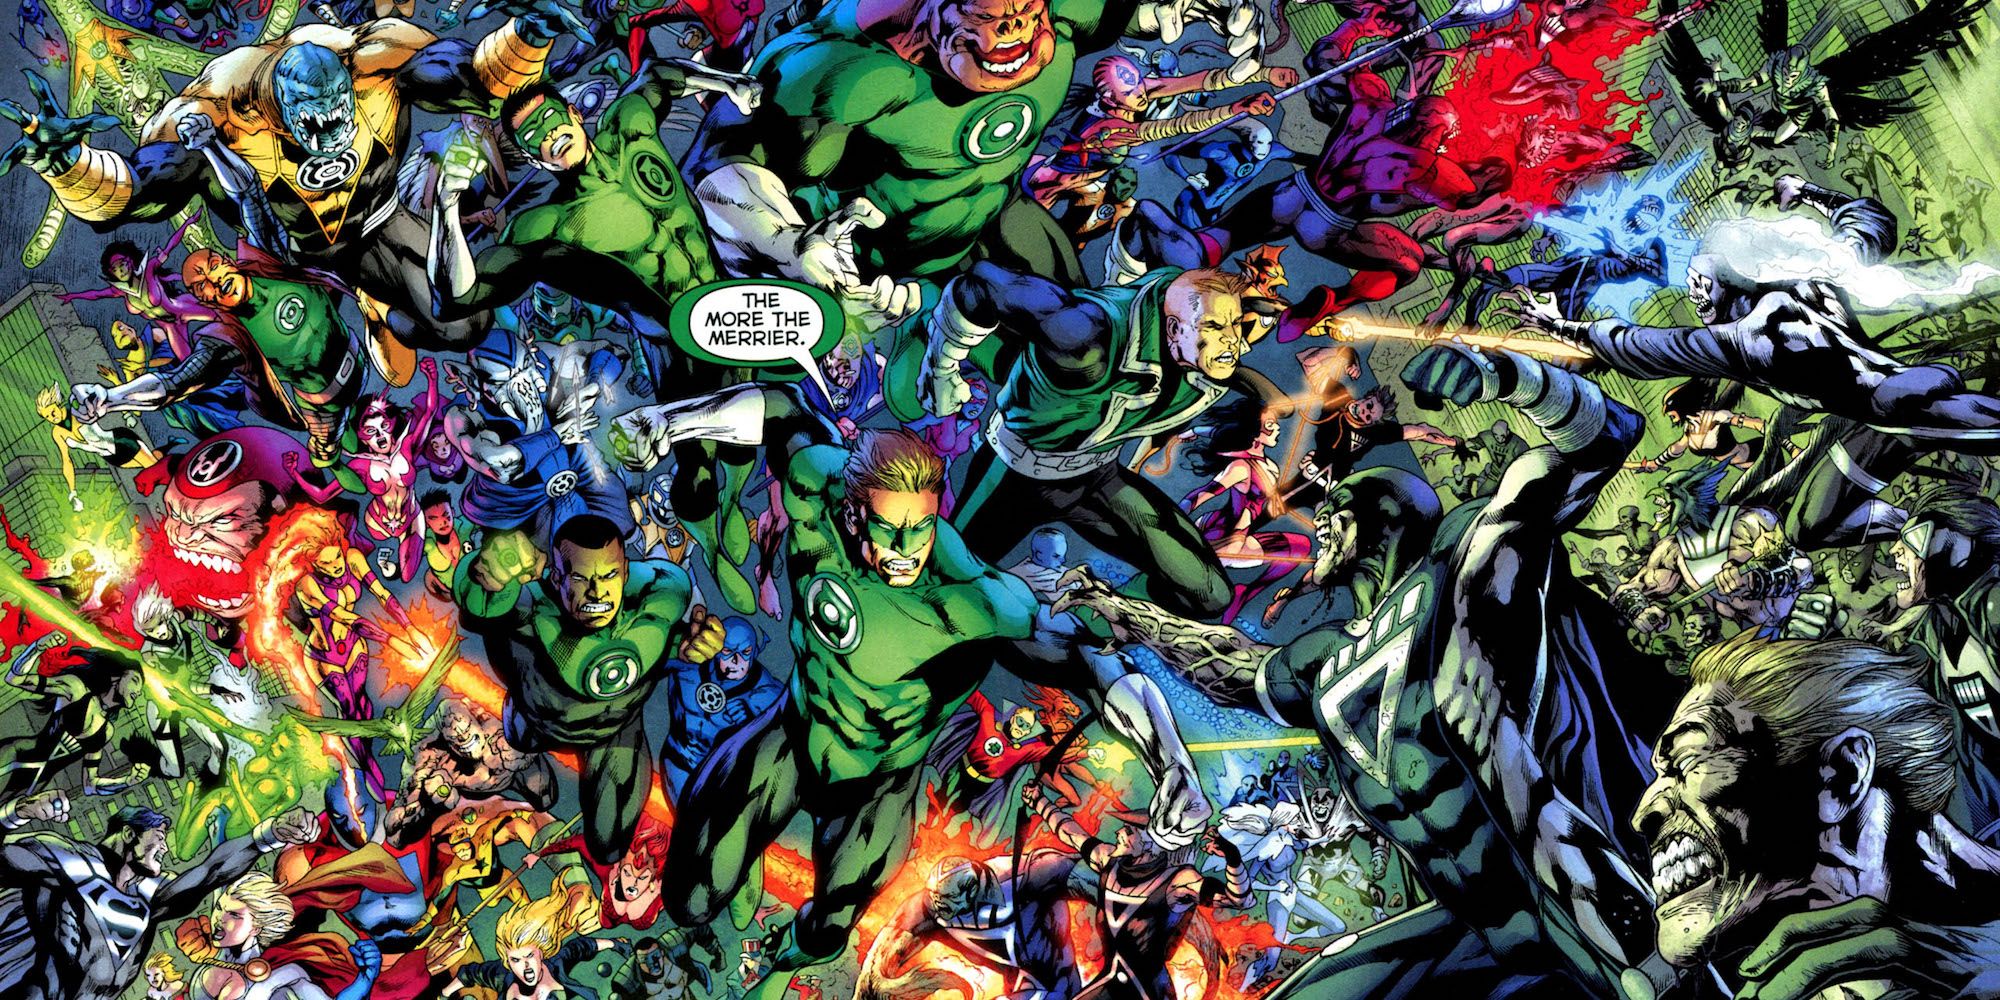 Green Lantern leads the Justice League in Blackest Night crossover from DC Comics.